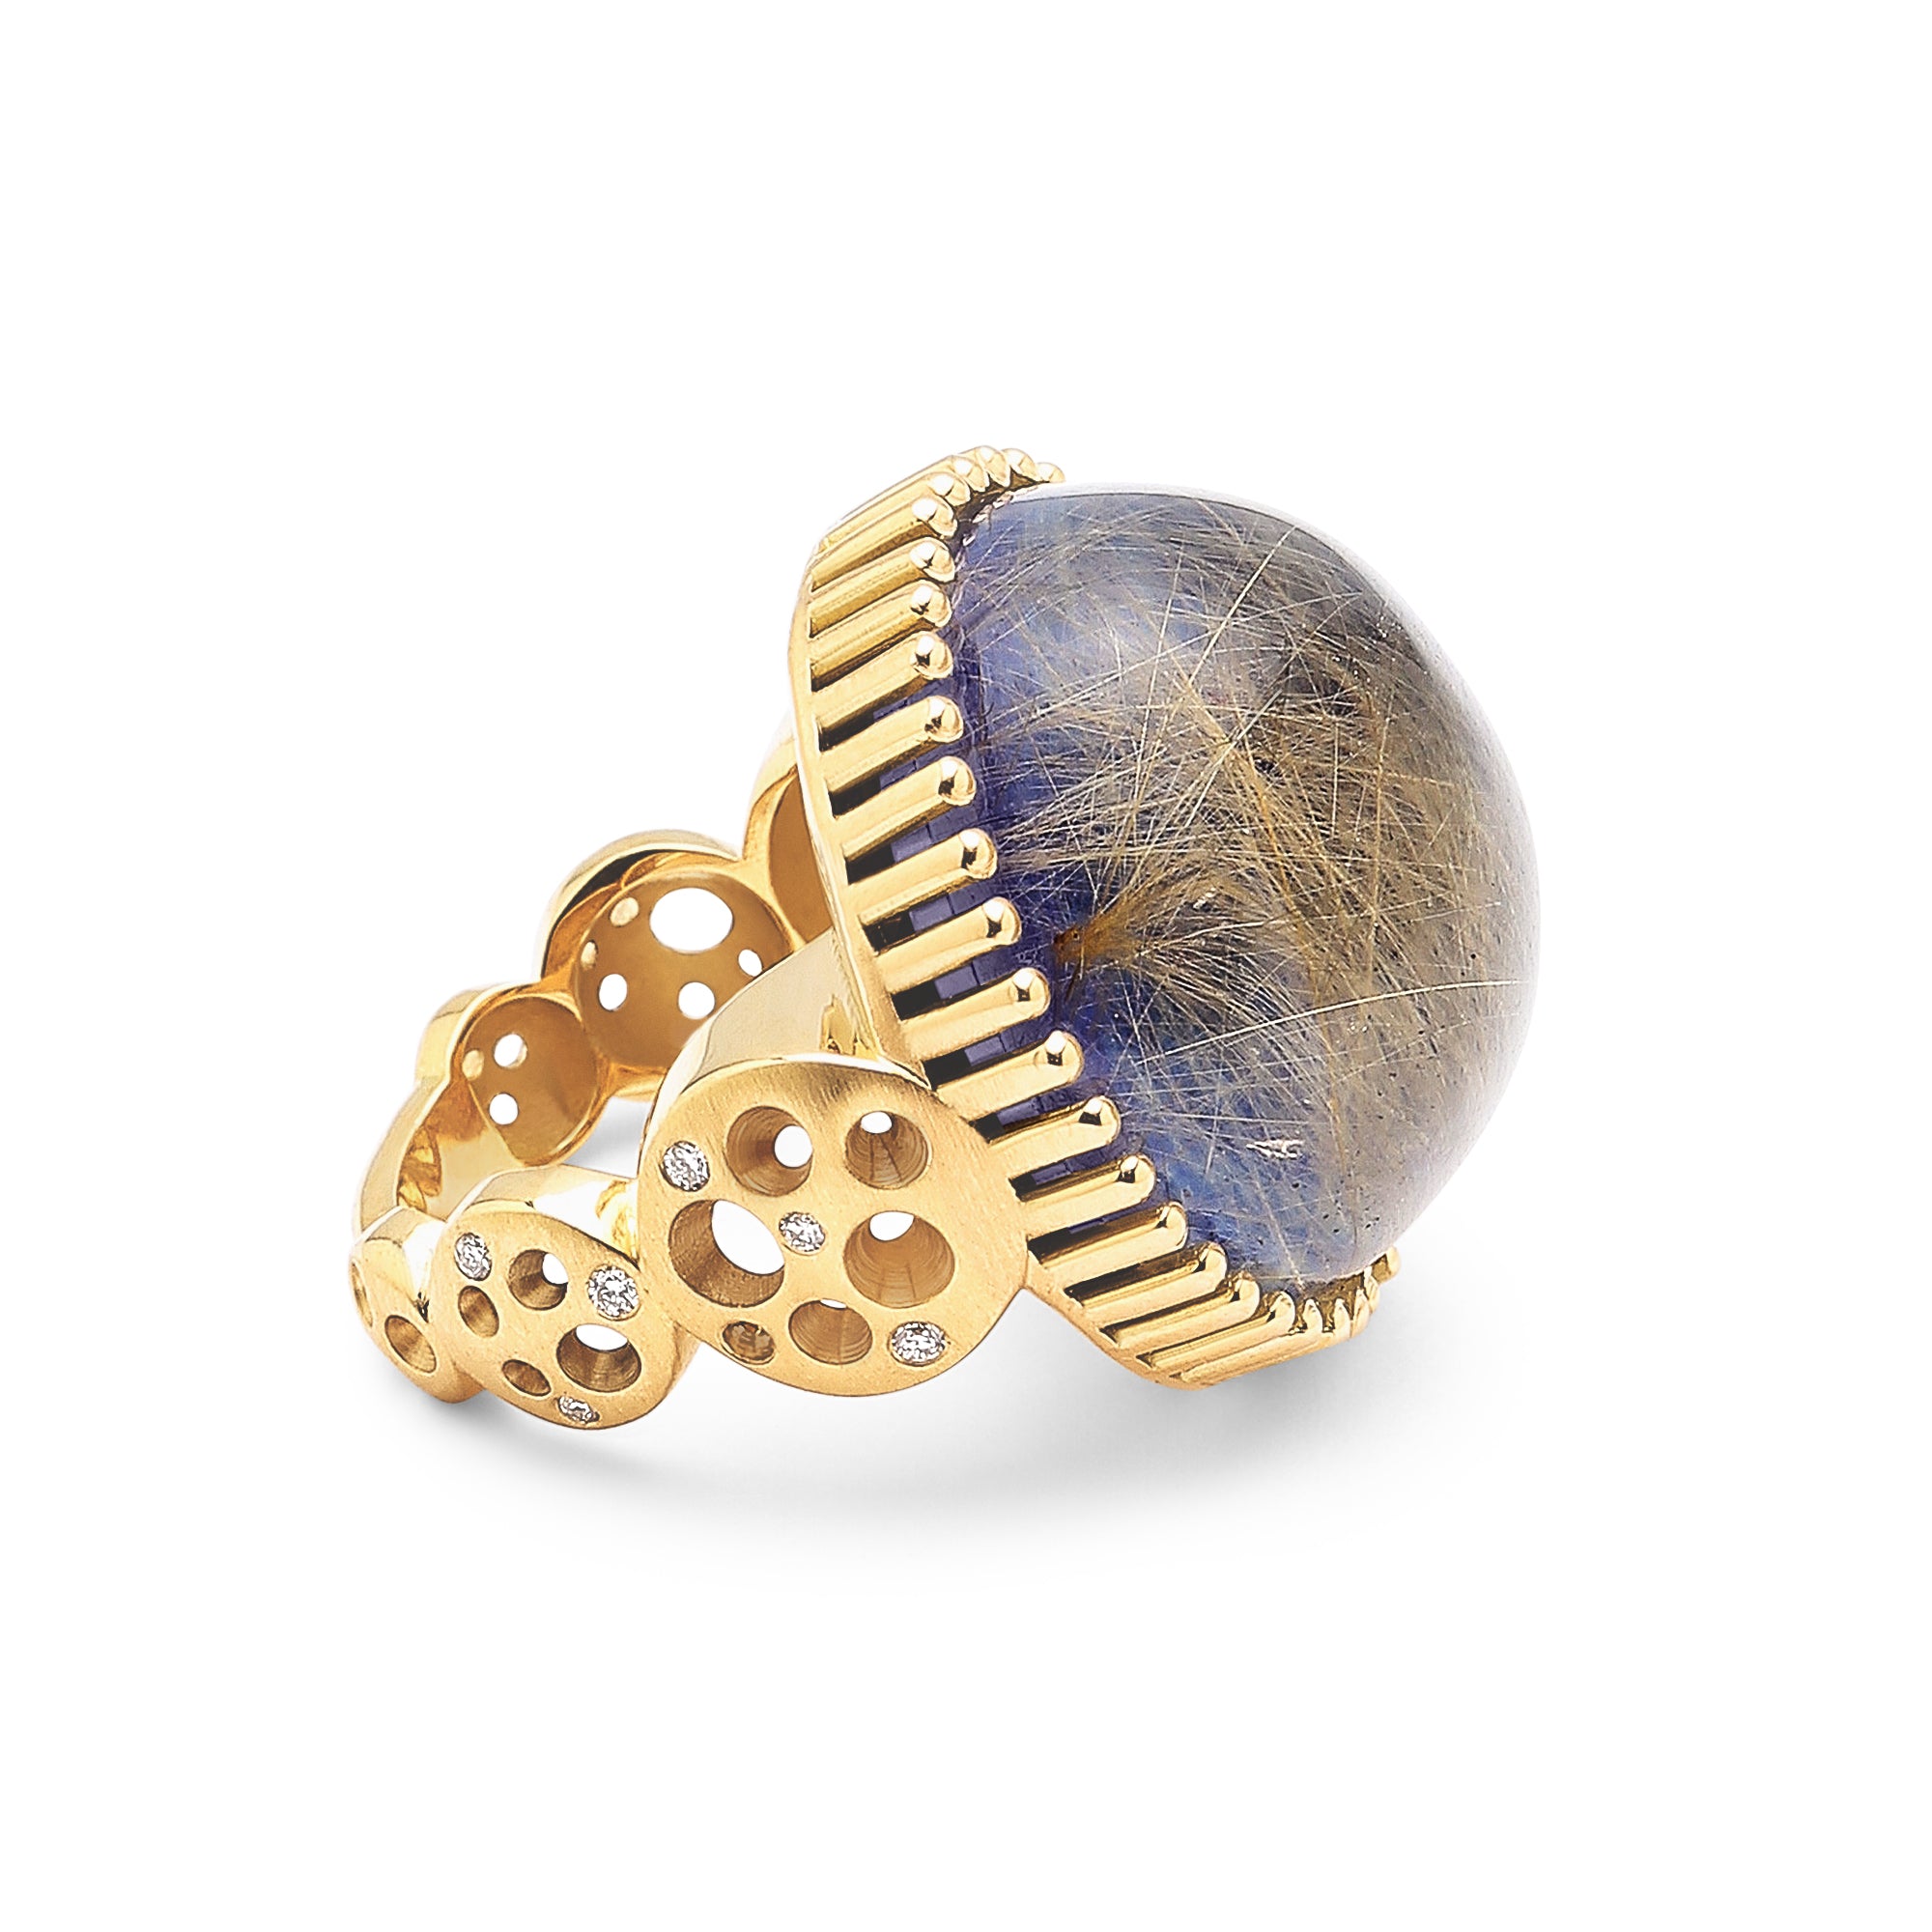 Round Rutilated Quartz over Lapis Lazuli Doublet Coin Band Ring